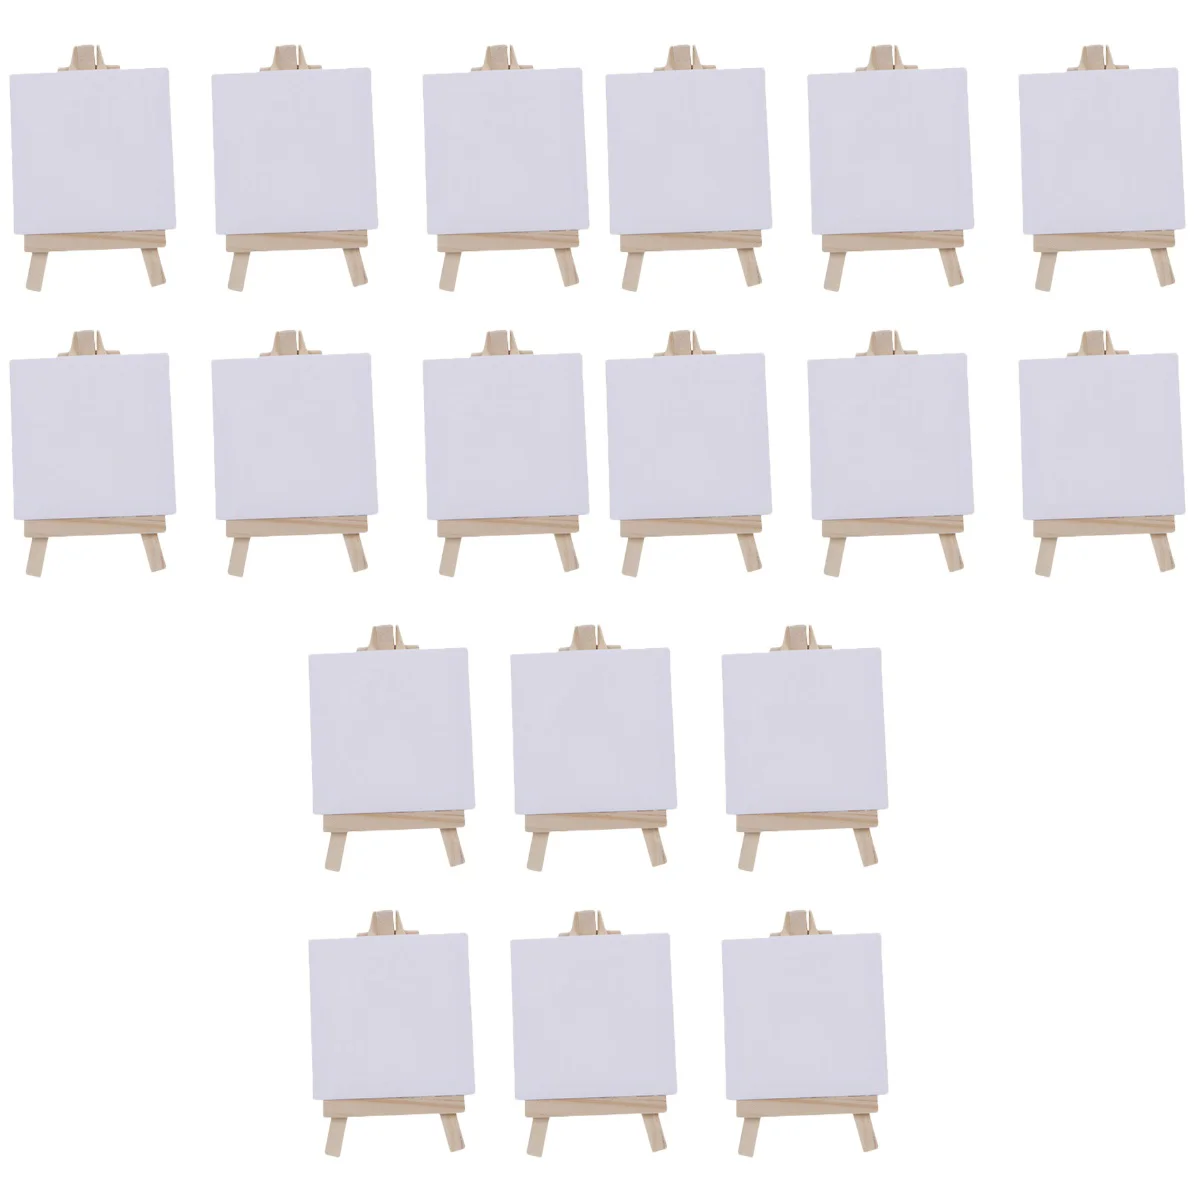 

18 Sets of Mini Stretched Artist Canvas Board White Blank Boards Wooden Oil Artwork painting Board(White) Easel